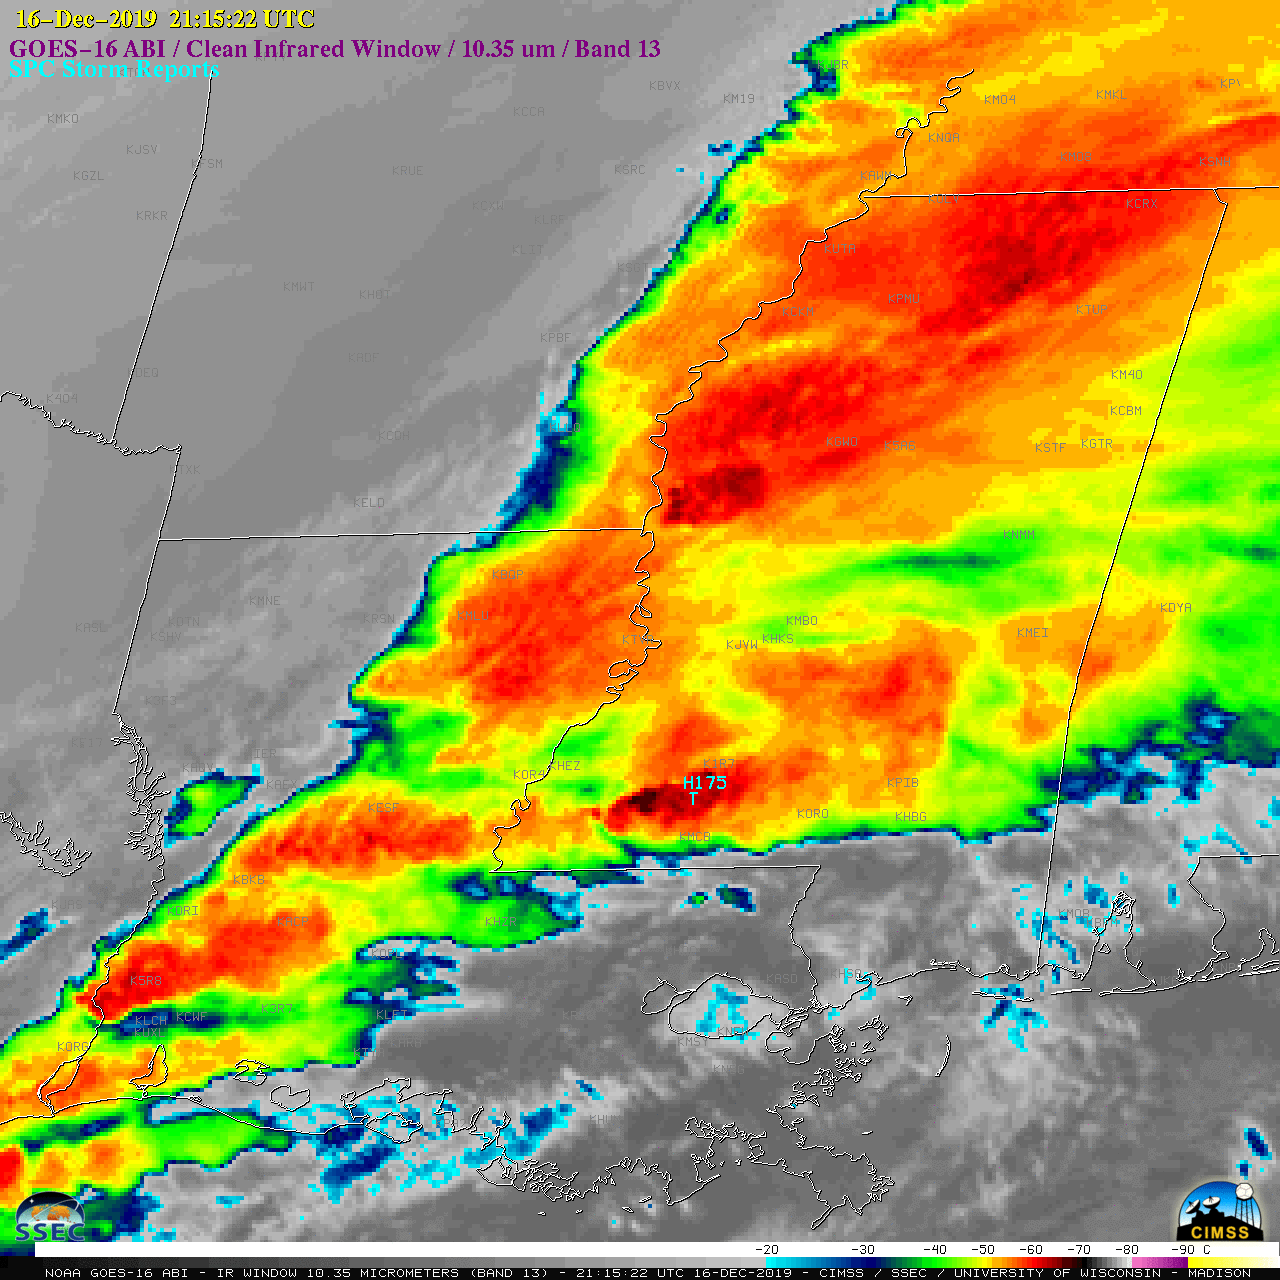 GOES-16 "Clean" Infrared Window (10.35 um), with SPC Storm Reports plotted in cyan [click to play animation | MP4]